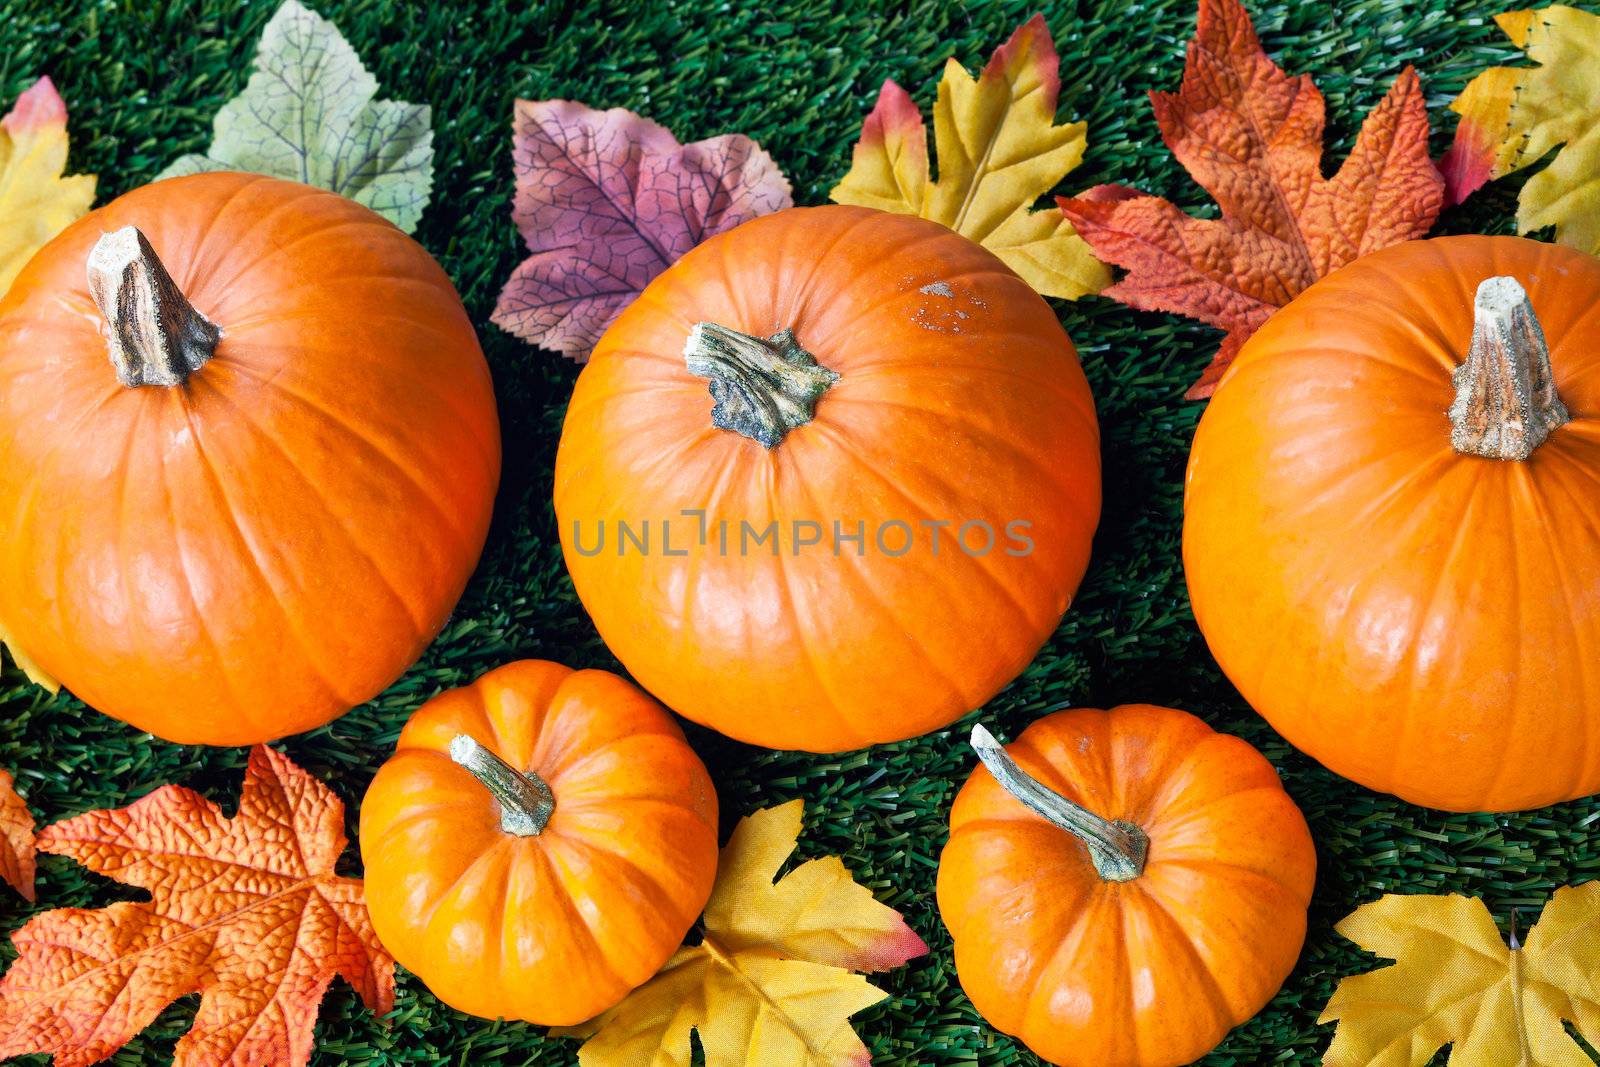 Overhead view of halloween pumpkins with autumn leaves arranged over grass.